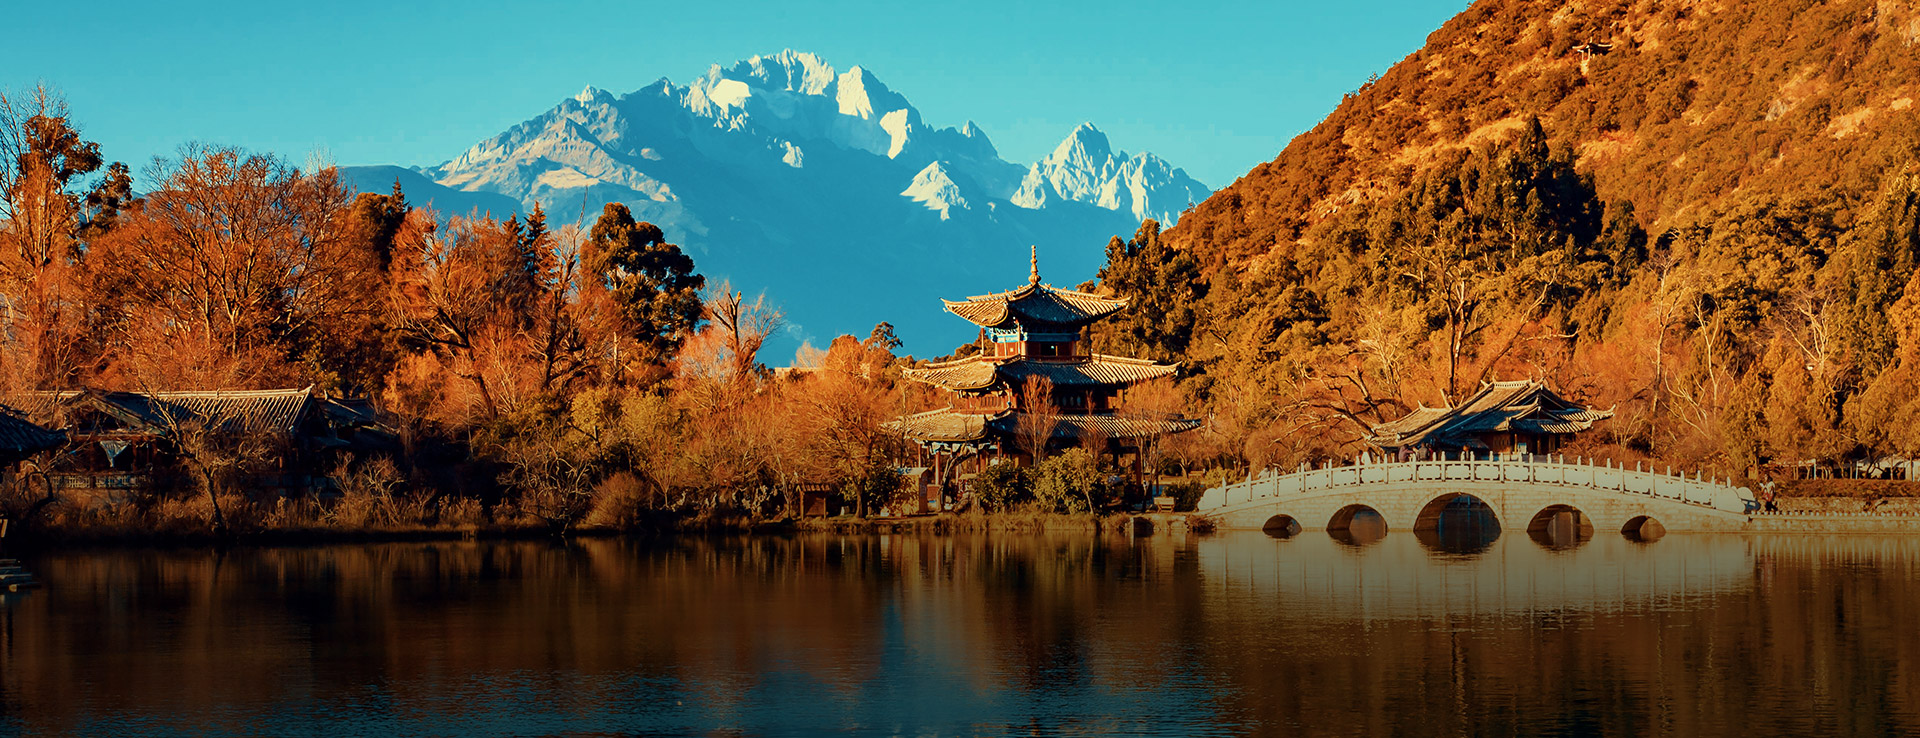 Chinese temple by a lake, mountain massif in the background